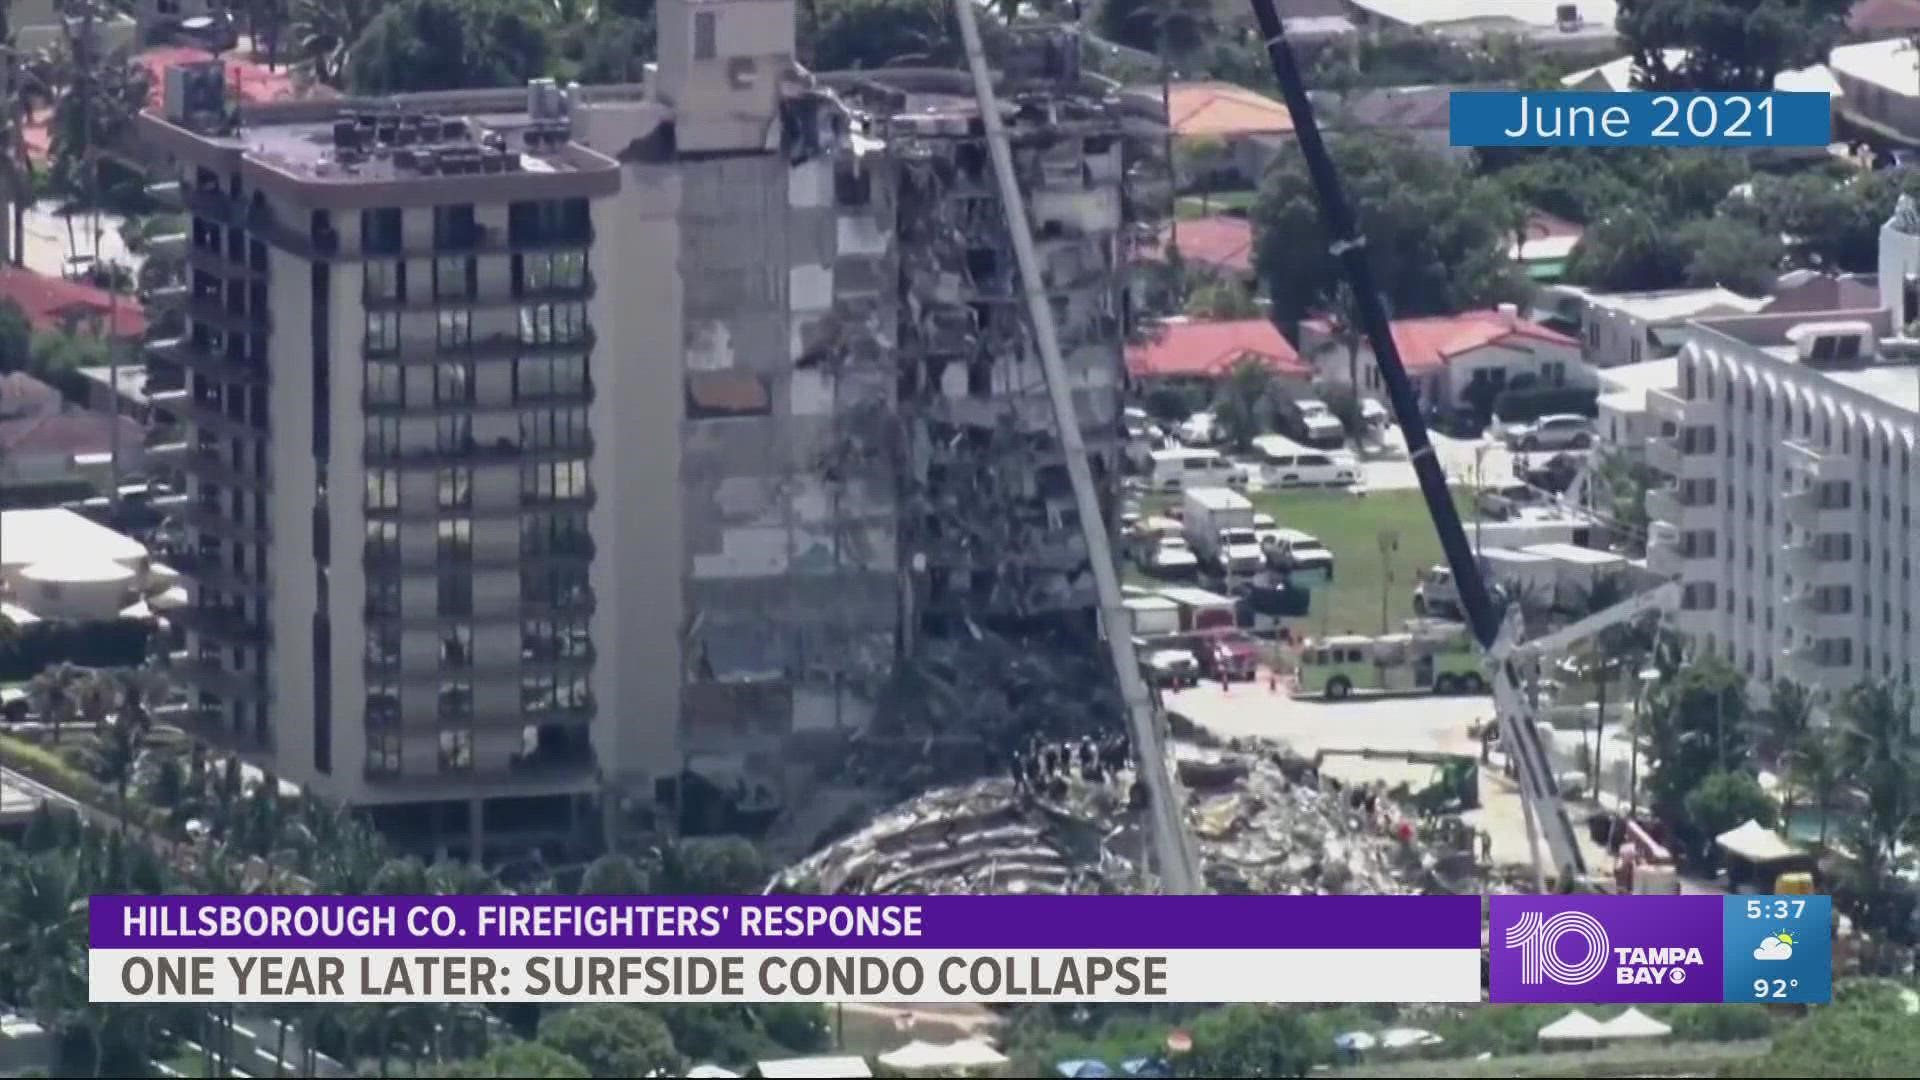 Structural engineers warned of issues with the building prior to its collapse, but the exact cause remains unknown.